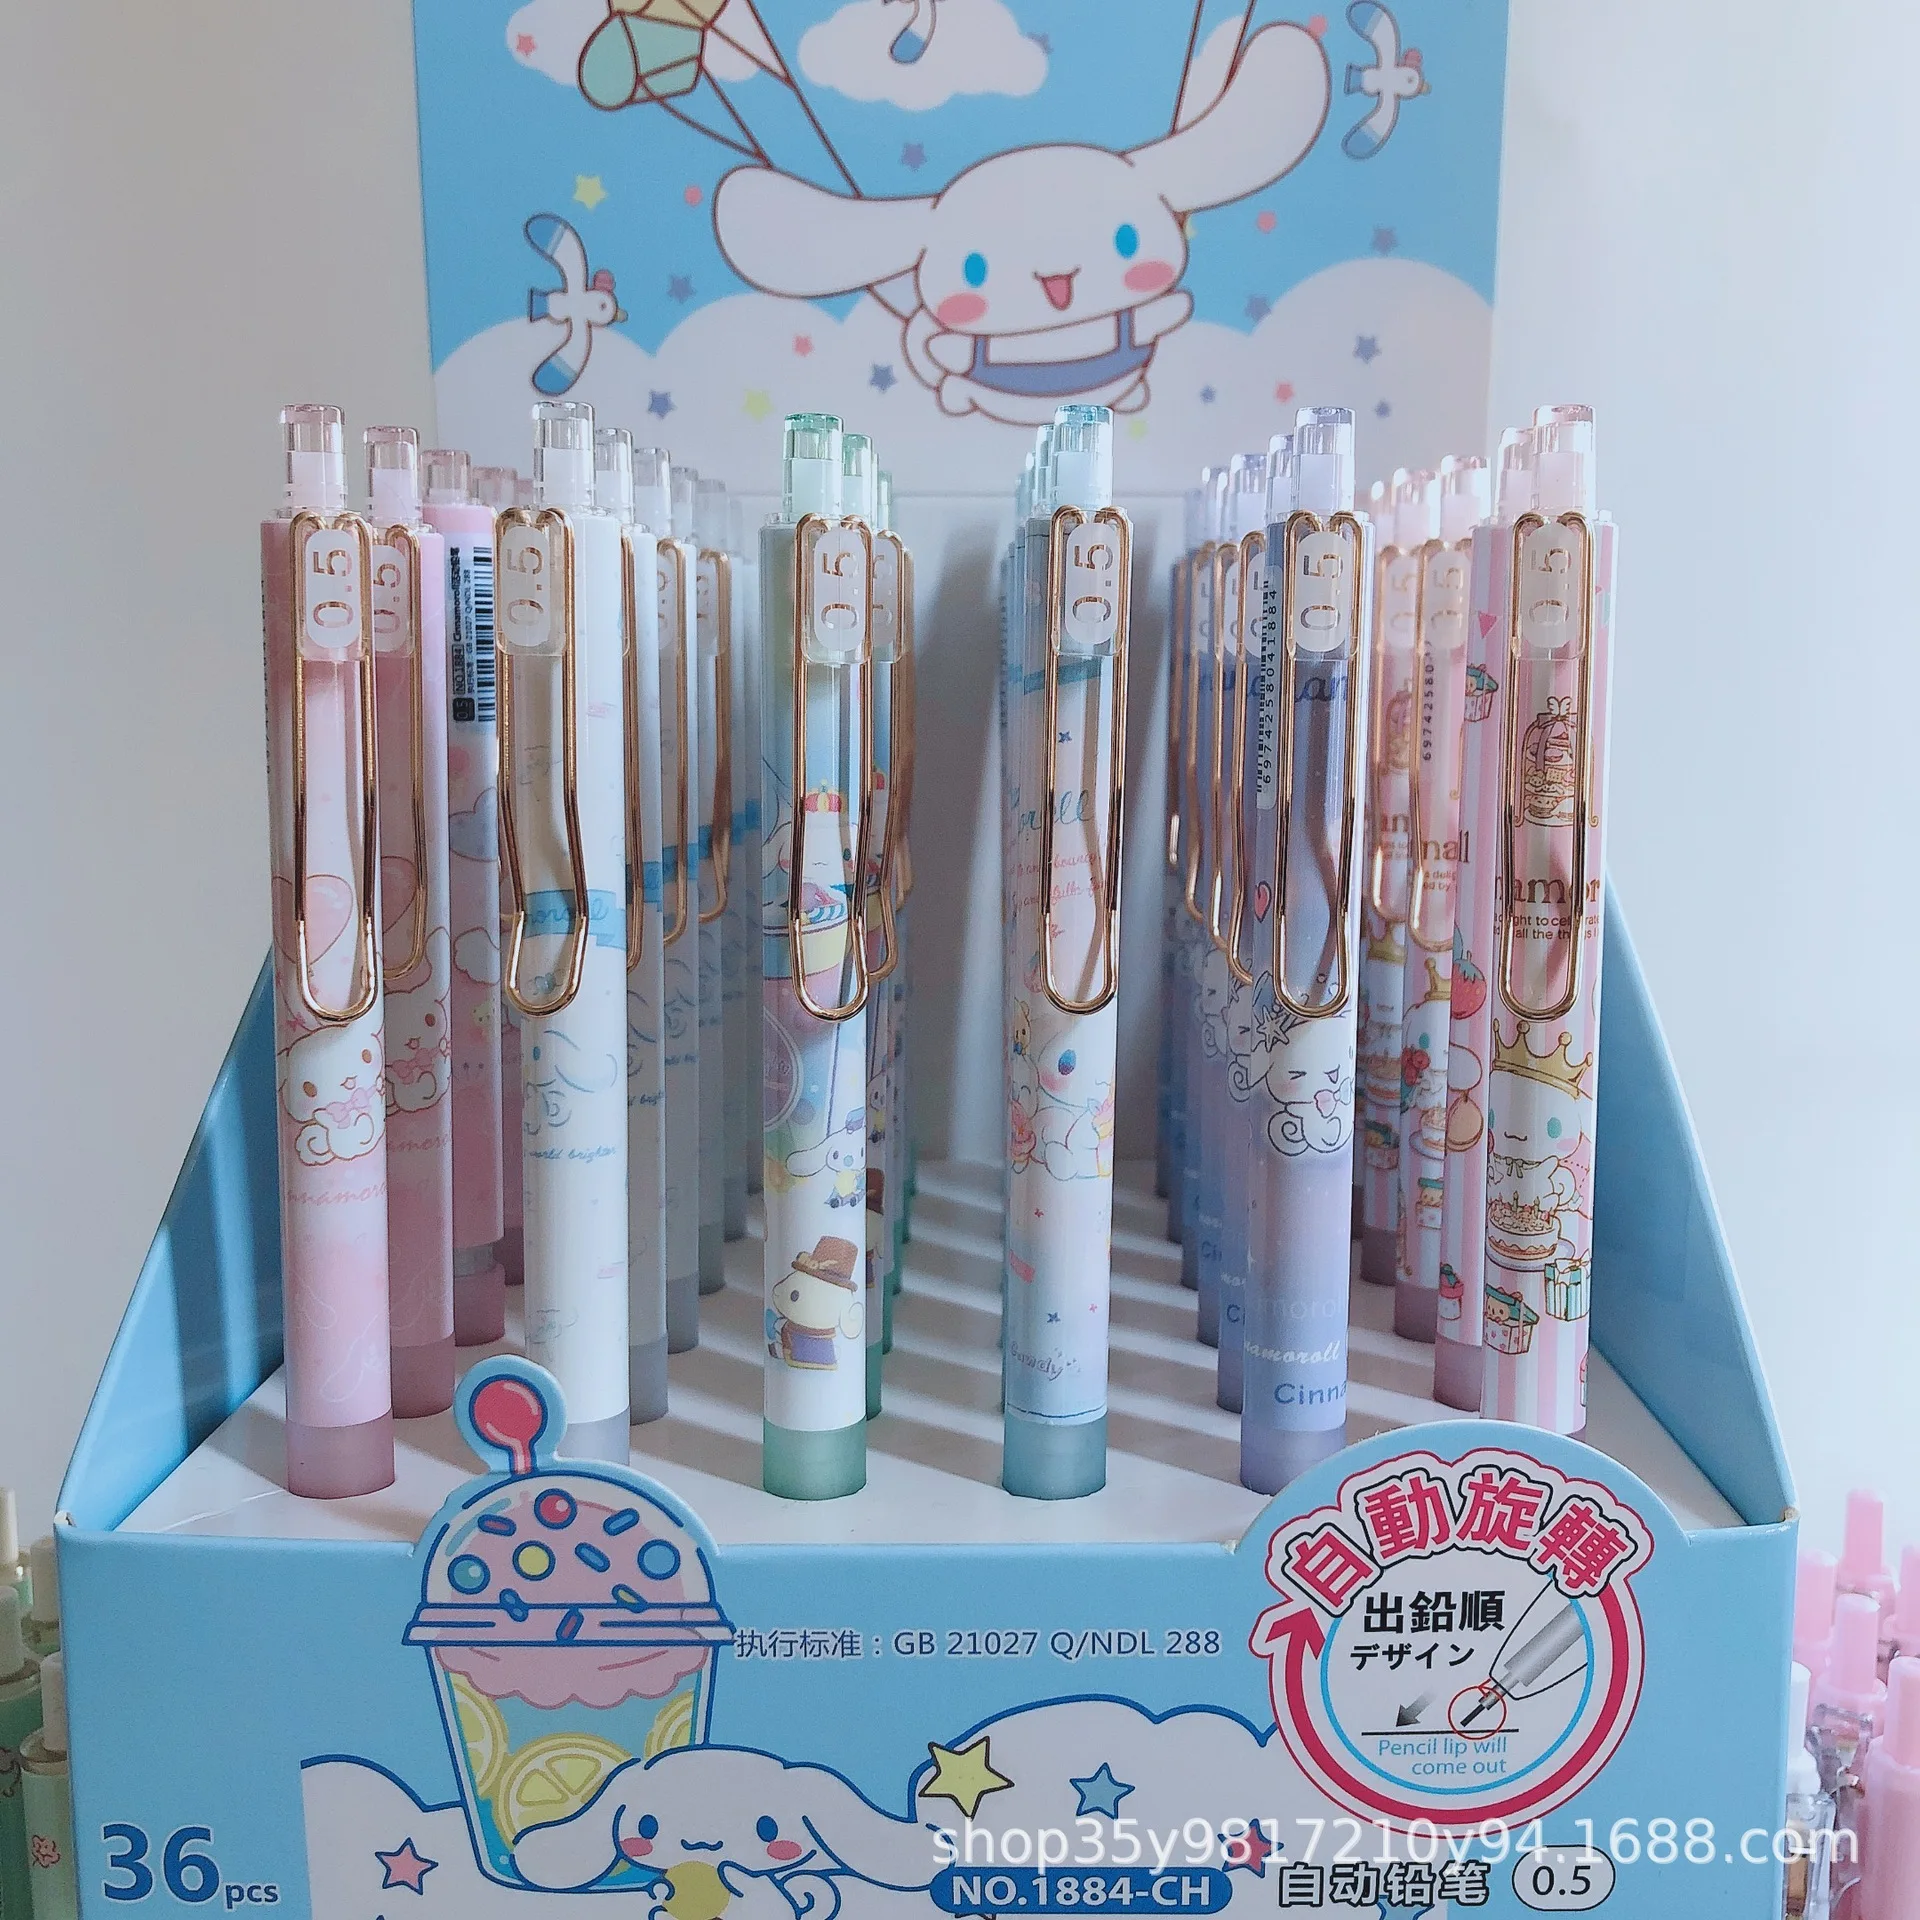 Sanrio neutral pen kawaii Cinnamoroll series cartoon touch pen lovely student stationery school supplies children's gifts 9pcs lot lovely plastic unicorn hair bands birthday supplies for kids girls headband with teeth hair hoop chic hair accessories